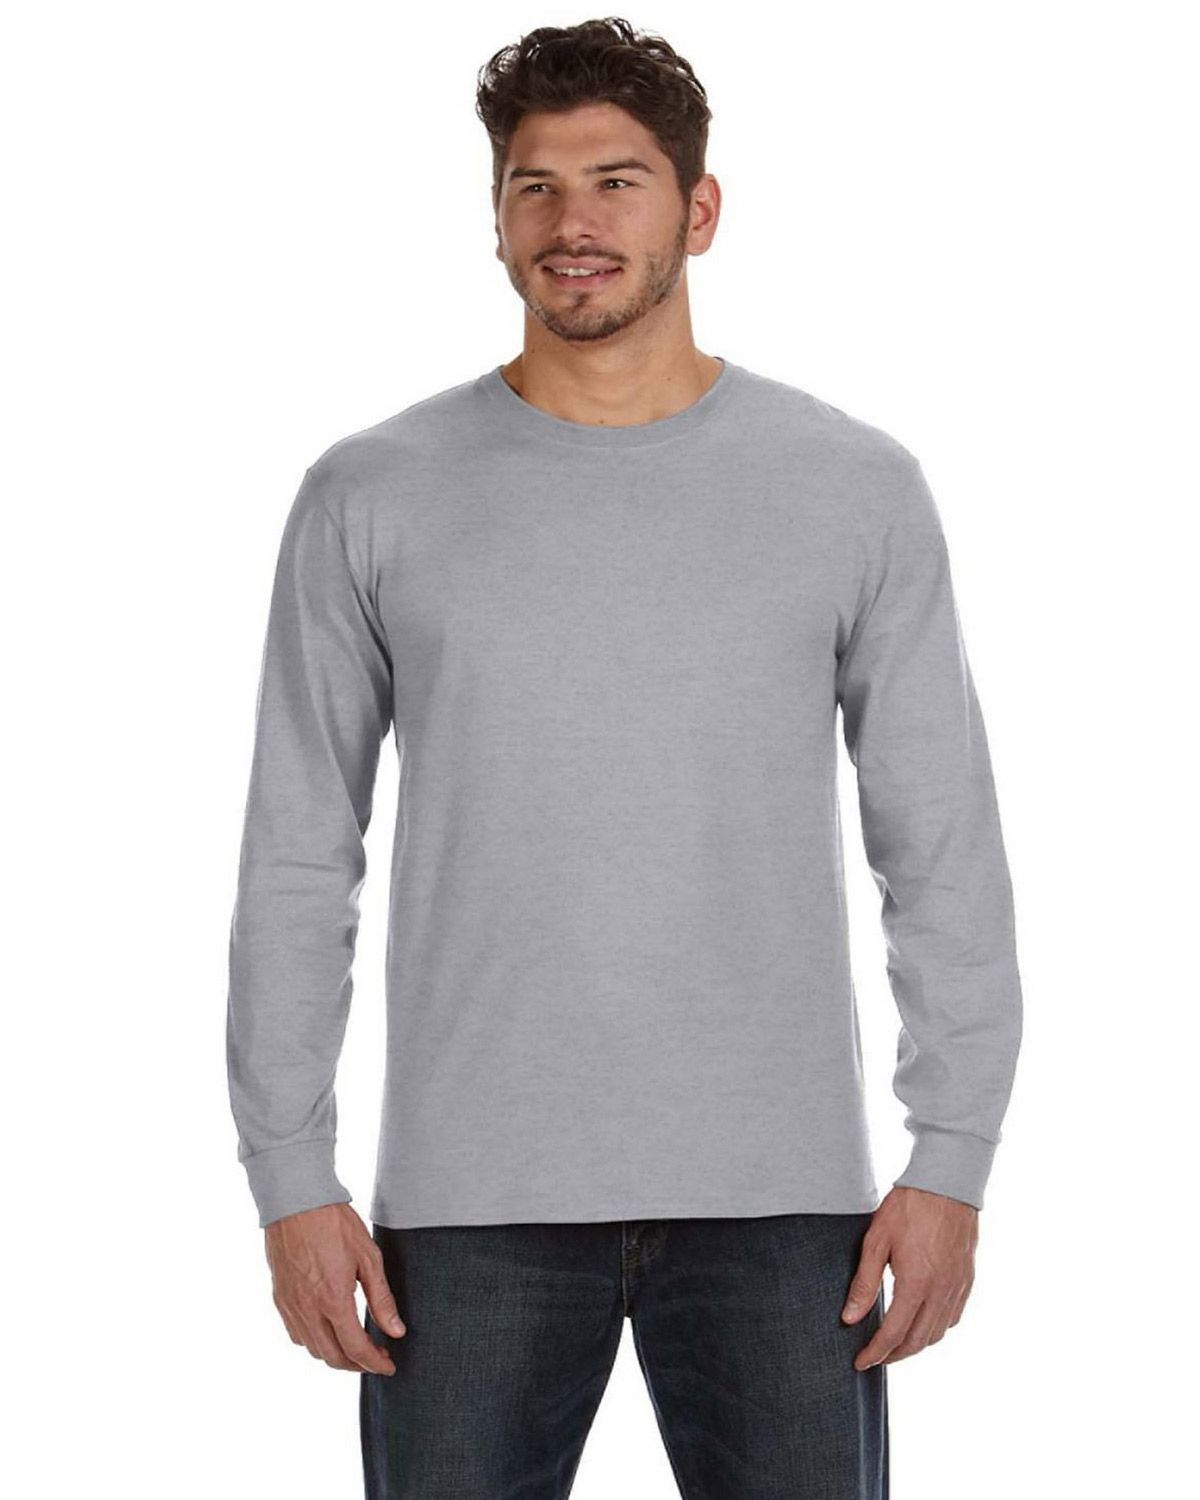 Anvil 784 Men's Anvil Midweight Long Sleeve Cotton Tee